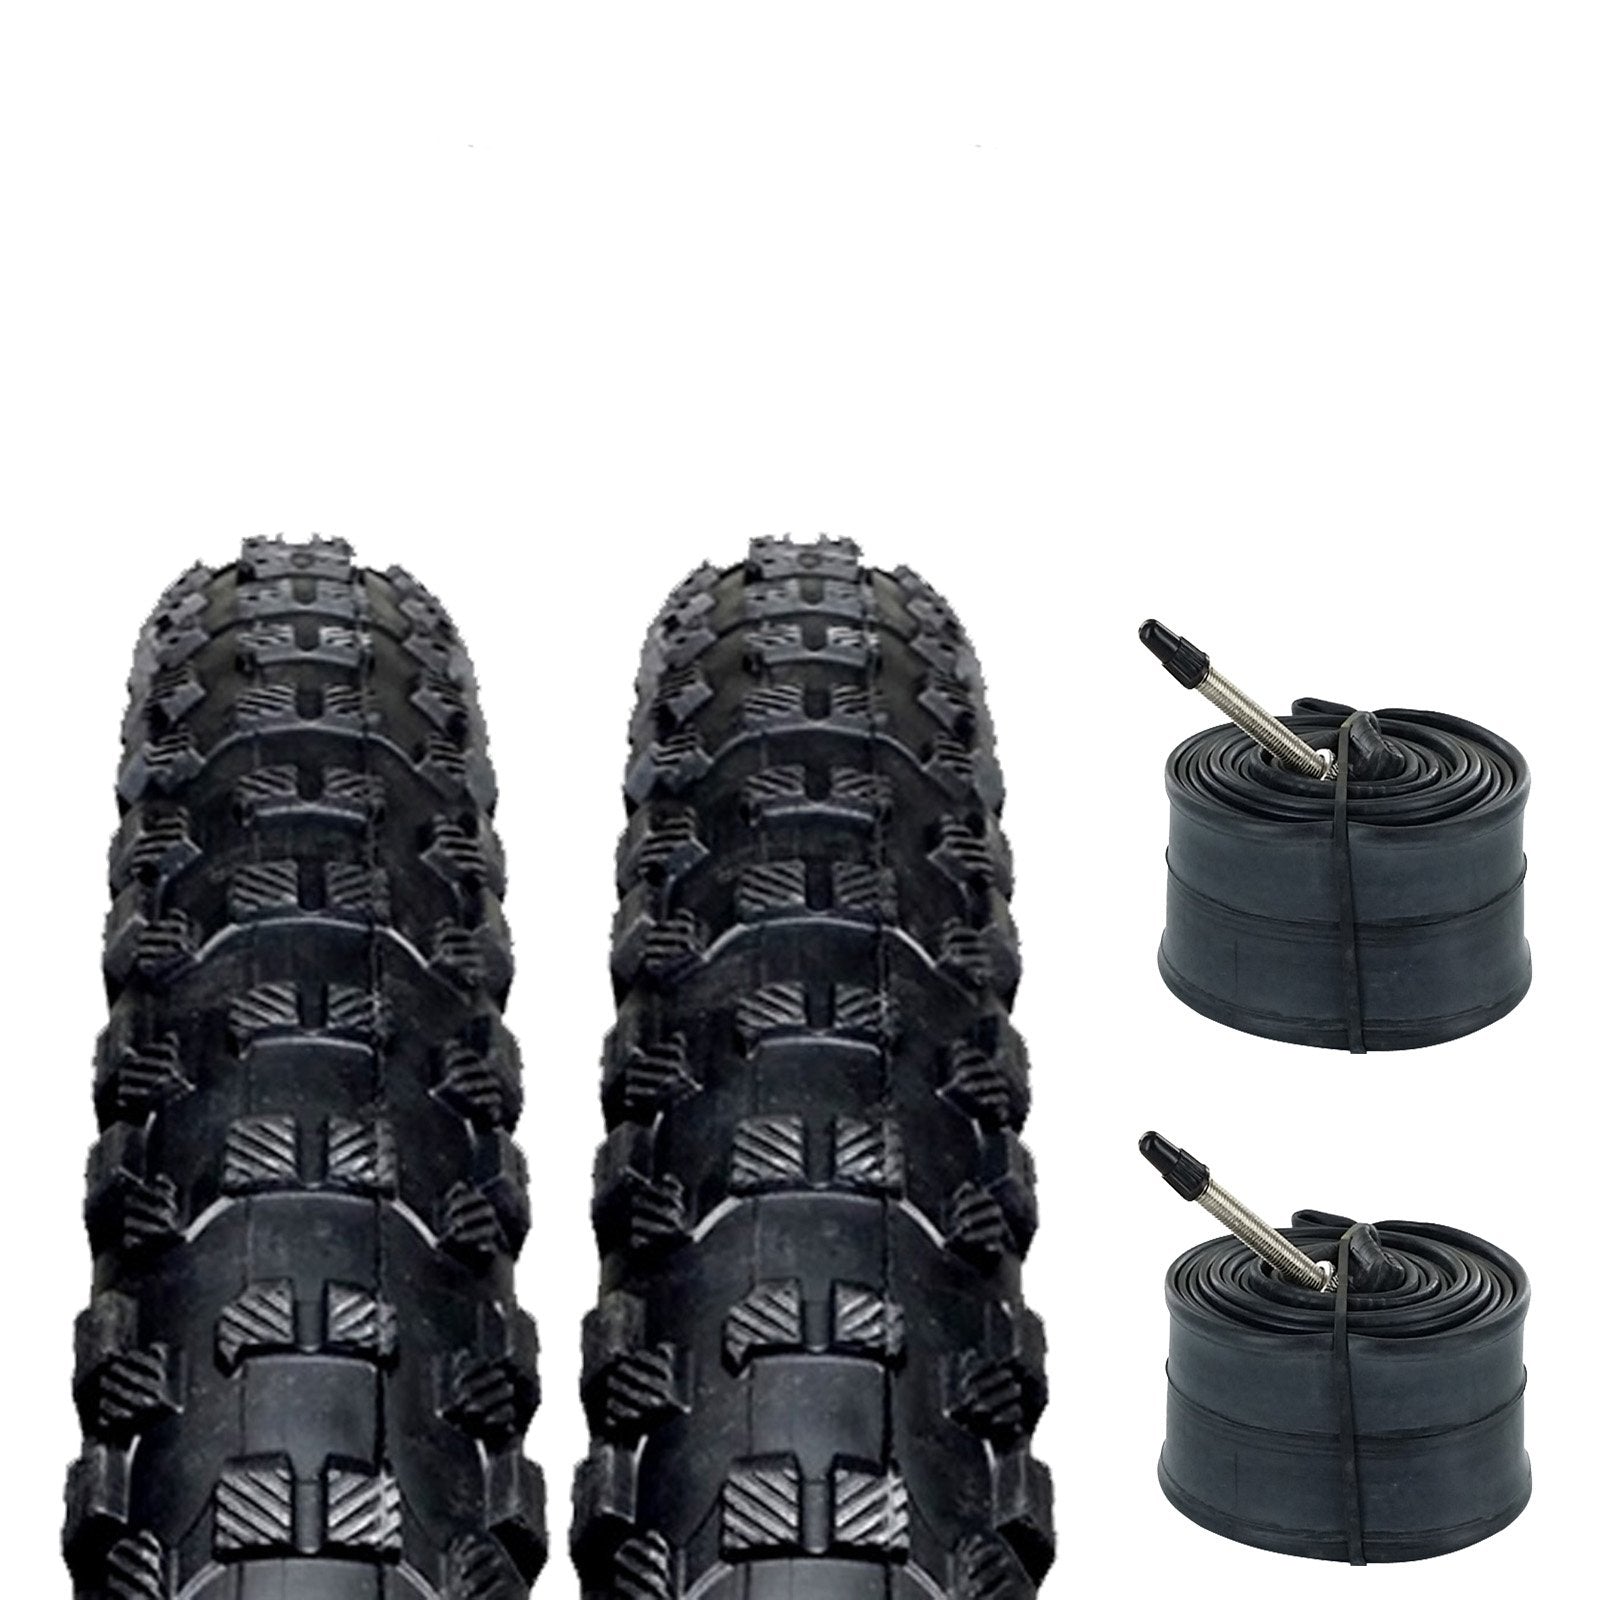 ZOL Bundle 2 Pack Z1221 Mtb Tires and Tube 29x2.10, Presta/French 48mm Valve - Zol Cycling